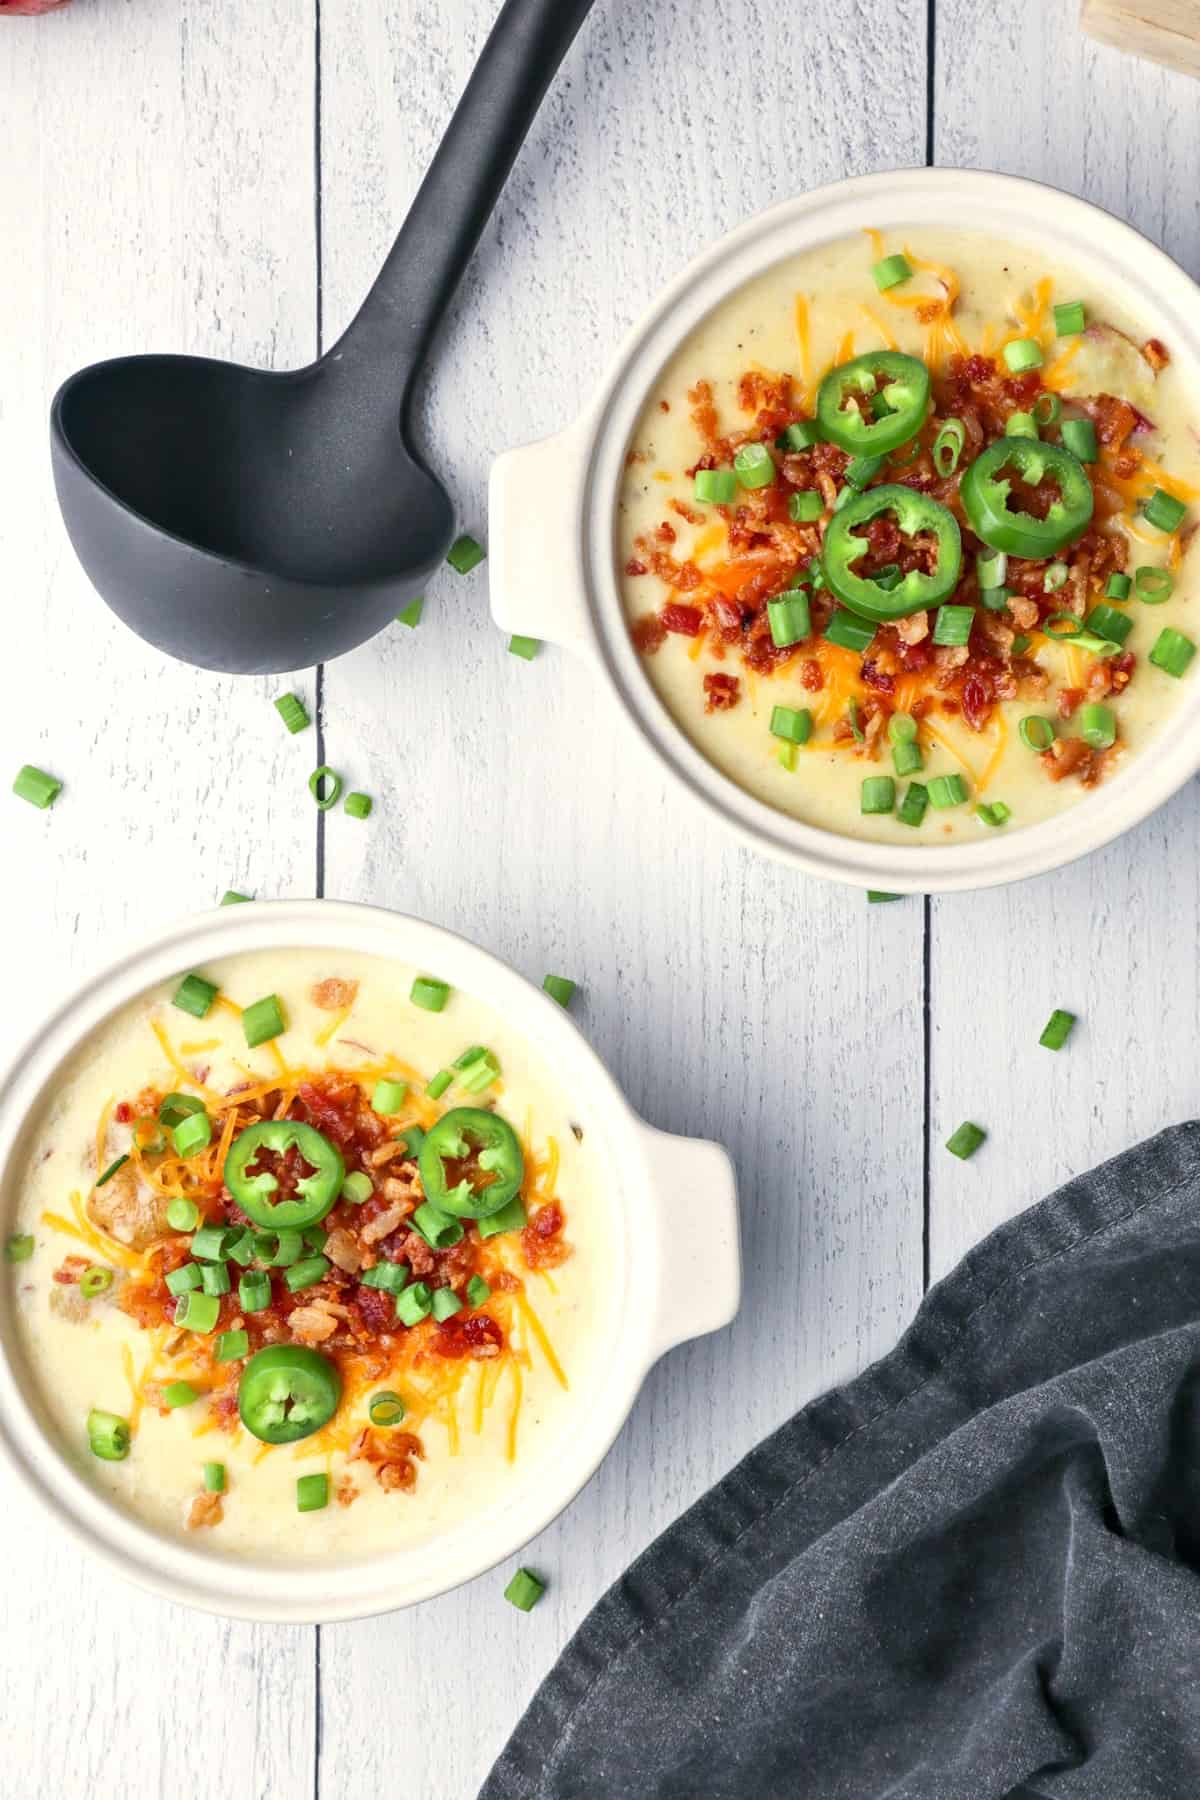 Two individual size crocks of loaded potato soup for serving, with a ladle on the side.